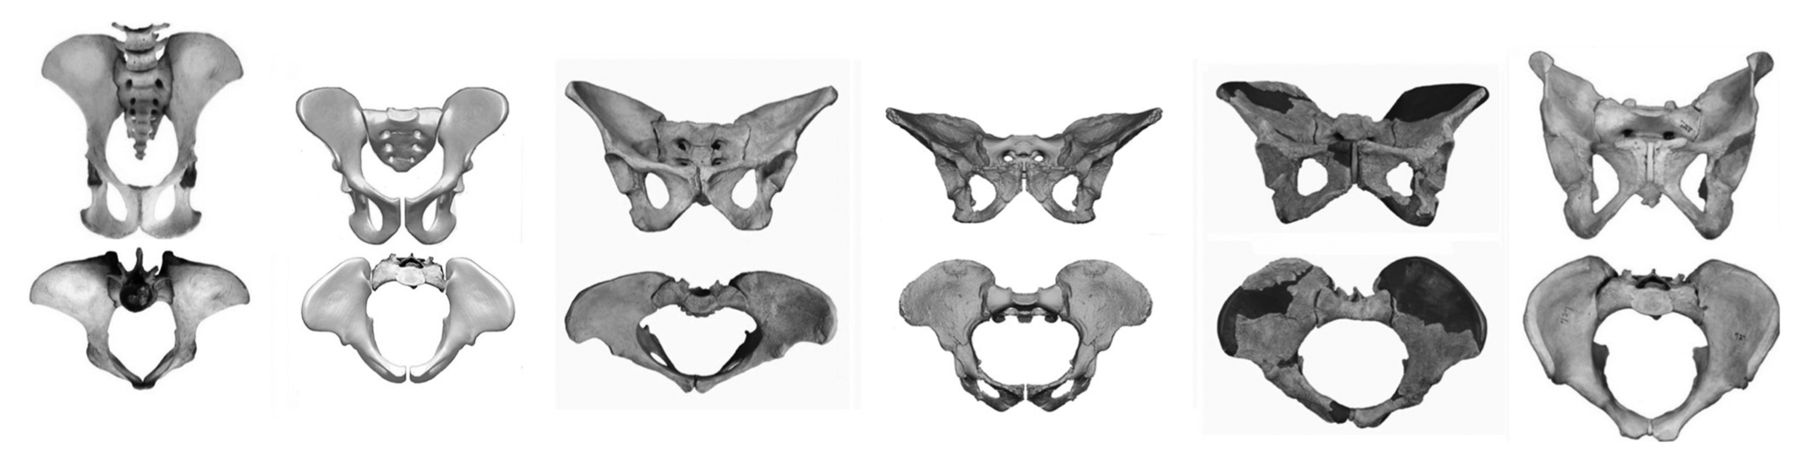 Fig. 4 
            Photographs and reconstructions showing
the evolution of the female pelvis, from the chimpanzee to man,
in anteroposterior (AP) (top row) and axial views (bottom row) From
left to right: chimpanzee, Ardipithecus ramidus (4.4
million years ago), Australopithecus afarensis (3.2
million years ago), Australopithecus africanus (2.7
million years ago), Homo erectus (1.5 million years
ago) and Homo sapiens. Scale is approximate. The
birth canal first widened transversely, but from Au. afarensis to H.
sapiens, the AP dimension deepened. (Reprinted with permission: Hogervorst
et al. Human hip impingement morphology: an evolutionary
explanation. J Bone Joint Surg [Br] 2011;93-B:769–776).
          